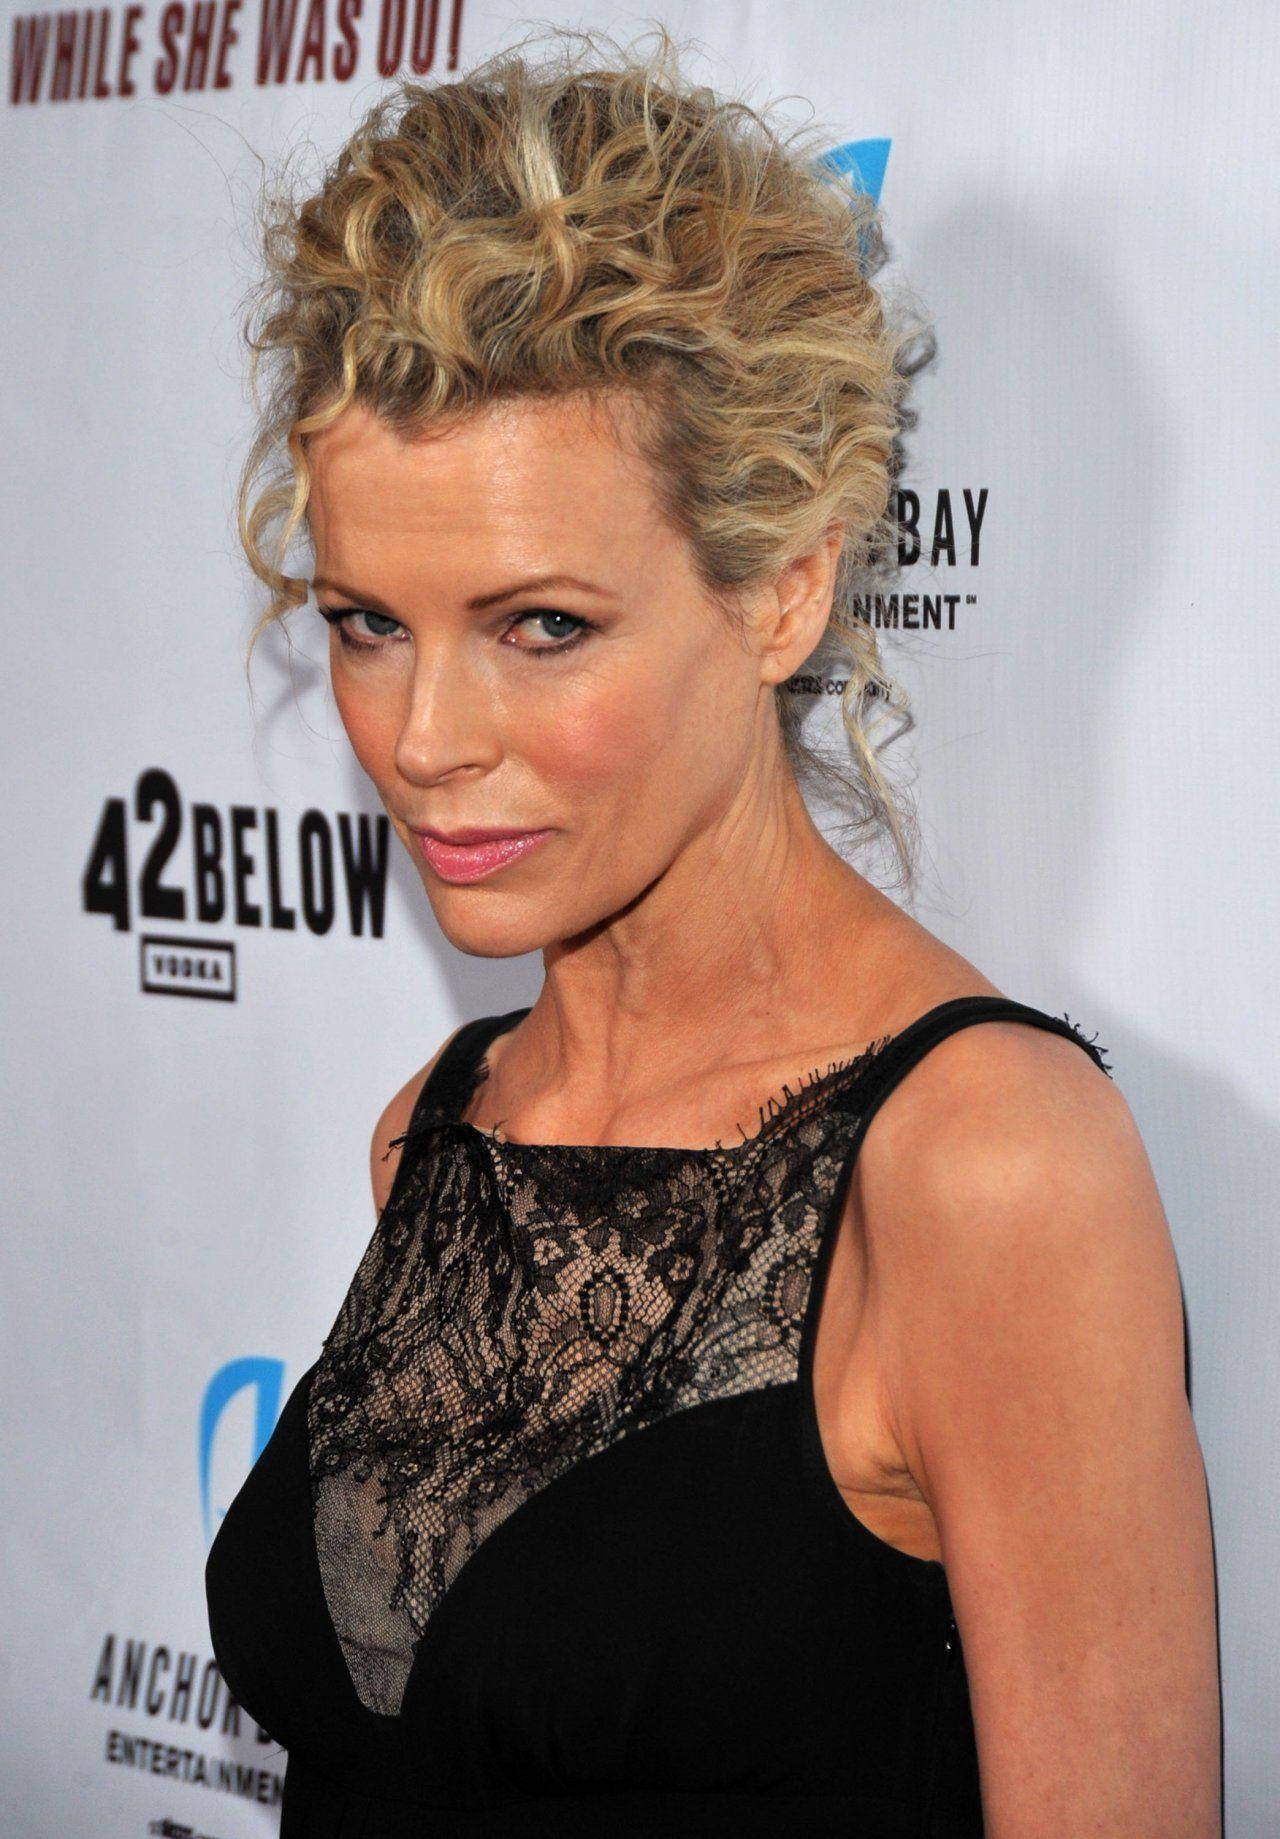 Kim Basinger Looking Dazzling at "While She Was Out" Premiere, 2008 Wallpaper